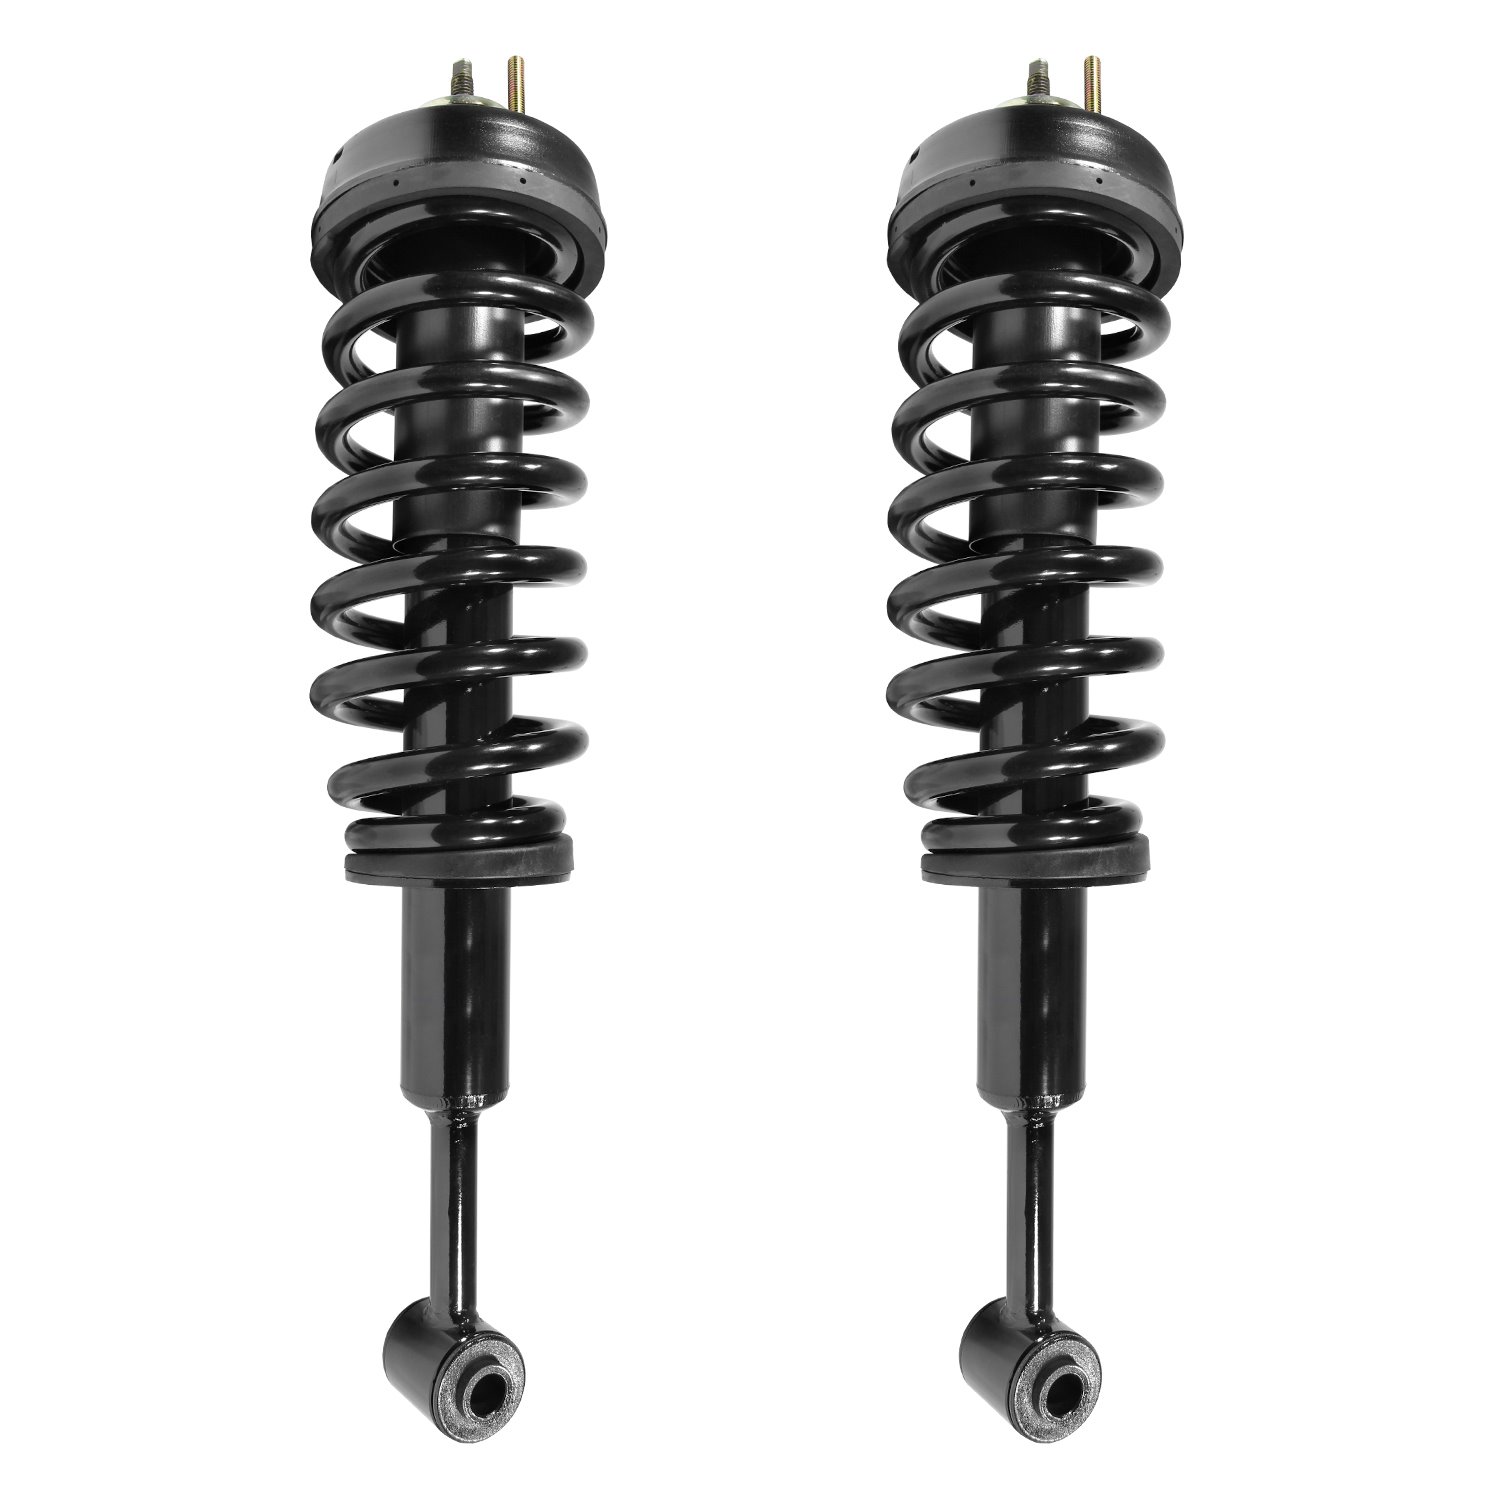 2-11890-001 Suspension Strut & Coil Spring Assembly Set Fits Select Ford Explorer, Mercury Mountaineer